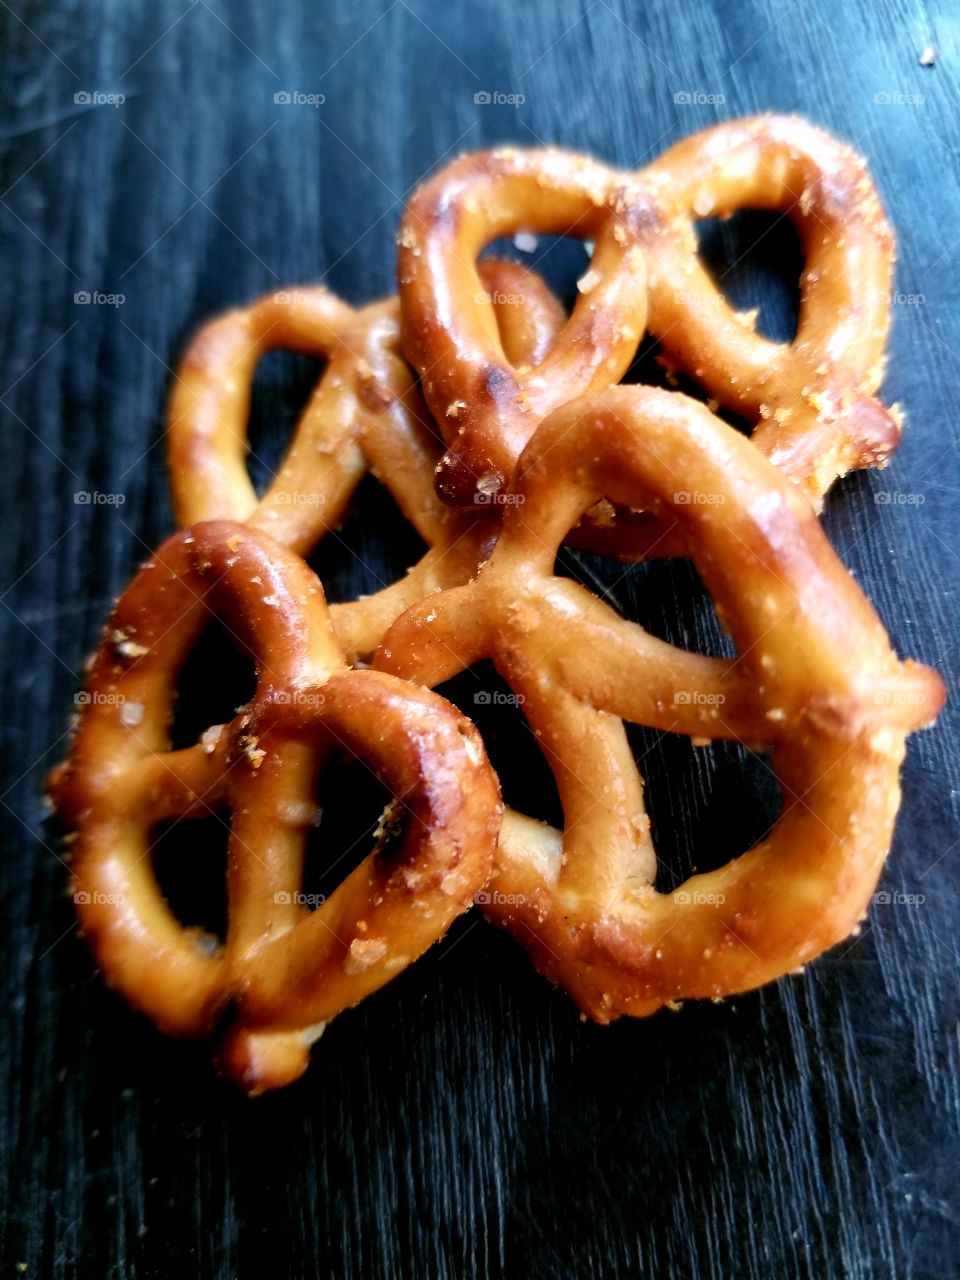 These pretzels are making me thirsty!!